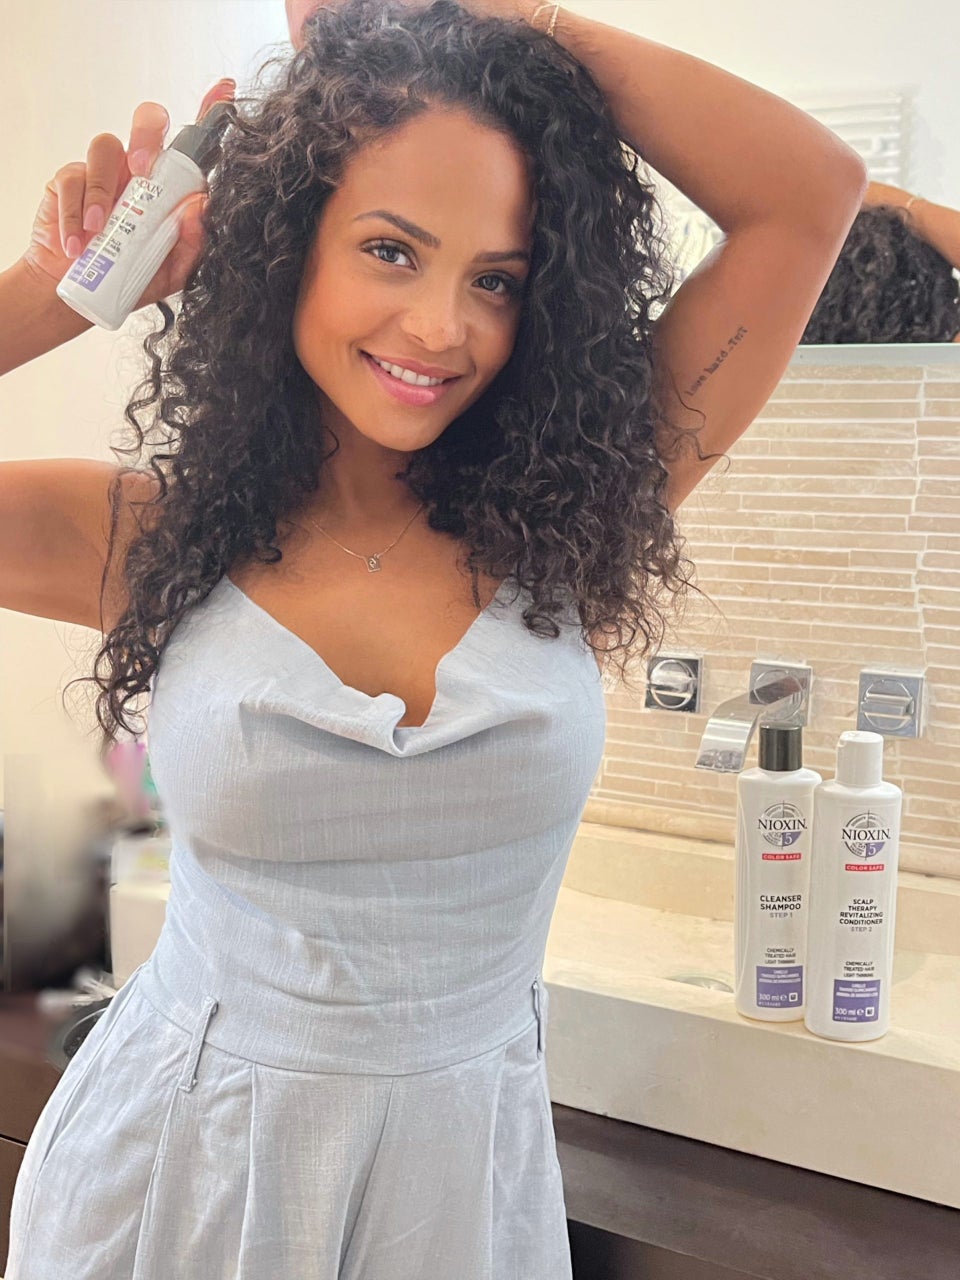 Christina Milian On Postpartum Hair Loss And Her Go-To Product To Combat It